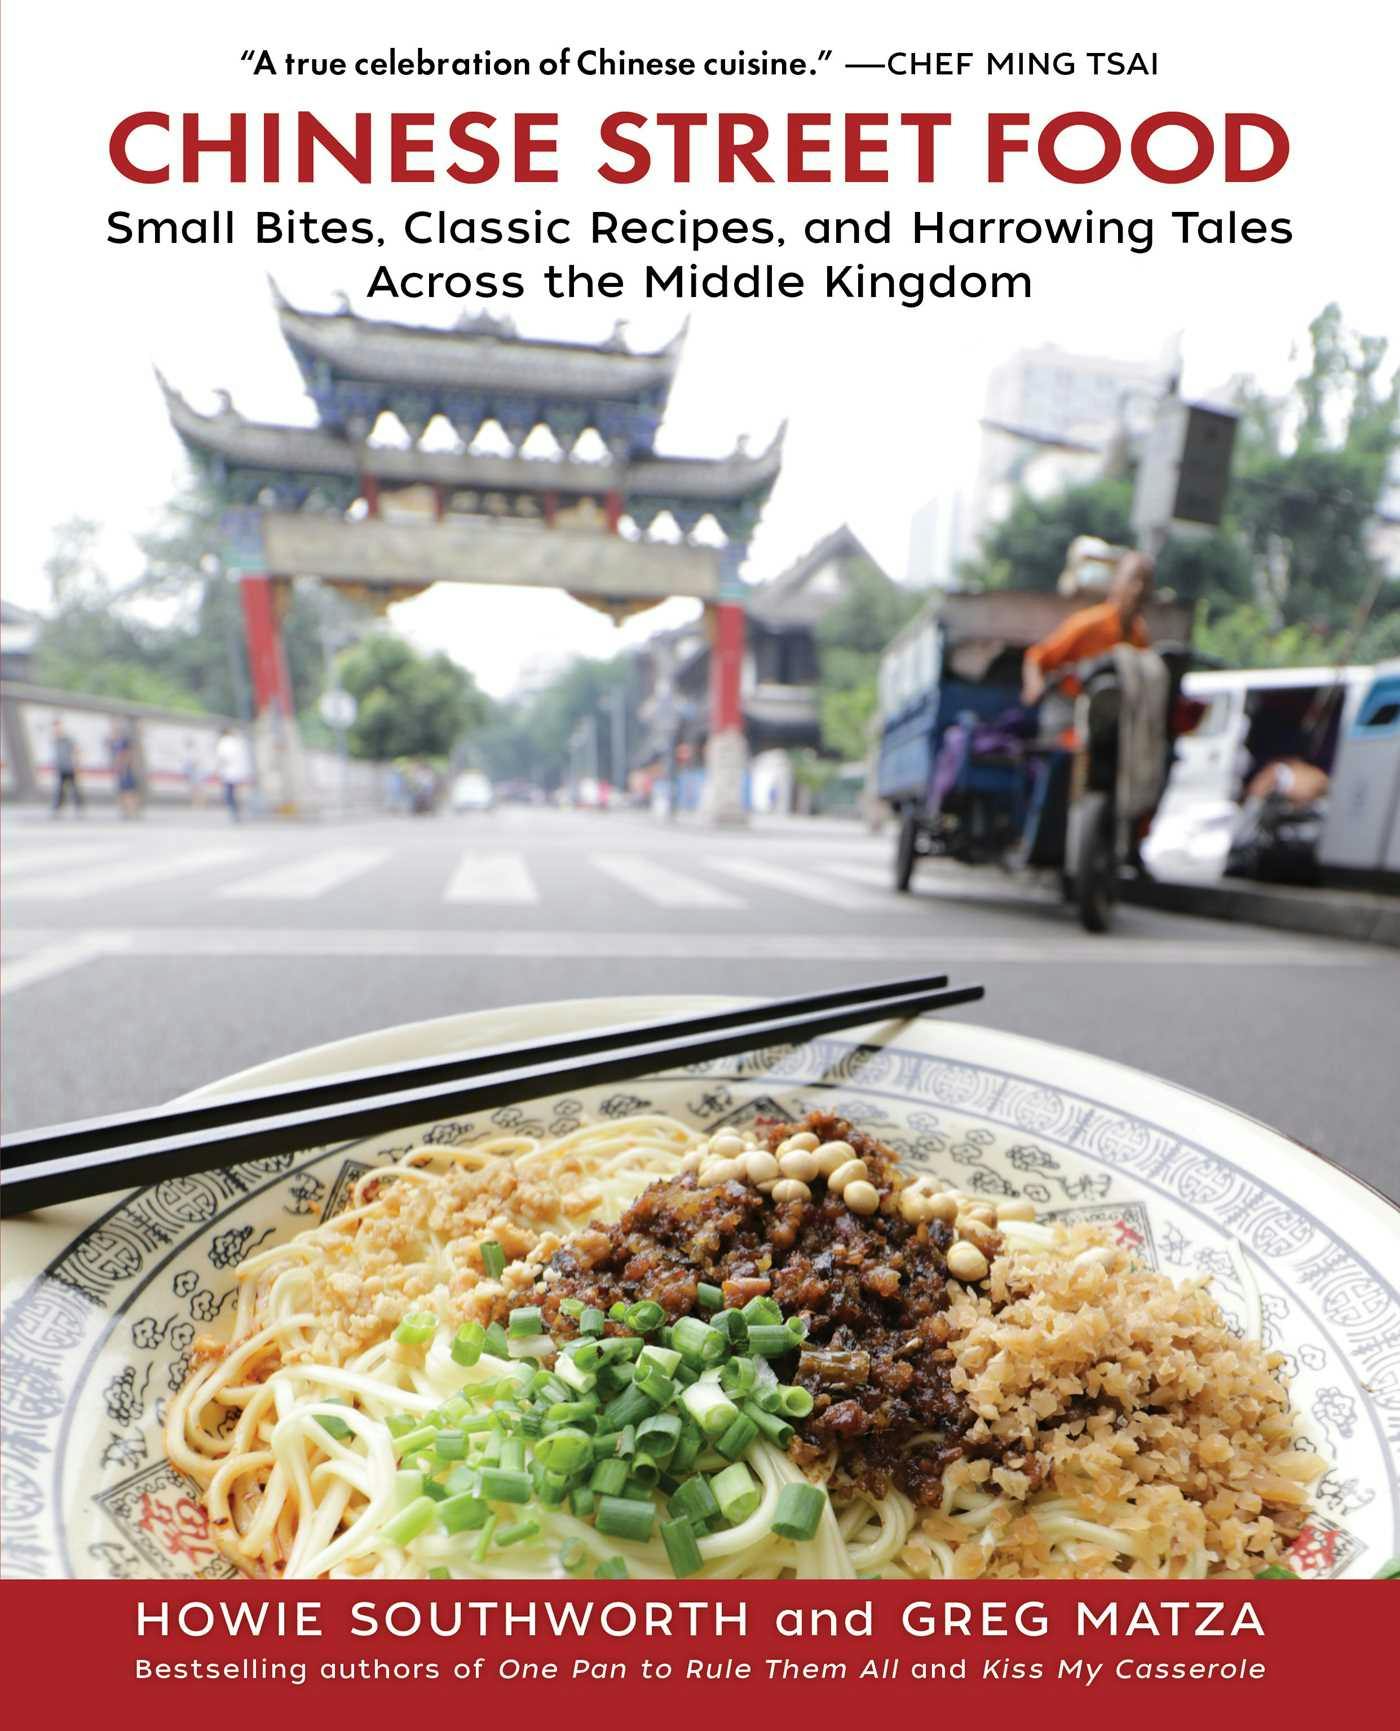 Chinese Street Food: Small Bites, Classic Recipes, and Harrowing Tales Across the Middle Kingdom - Greg Matza, Howie Southworth